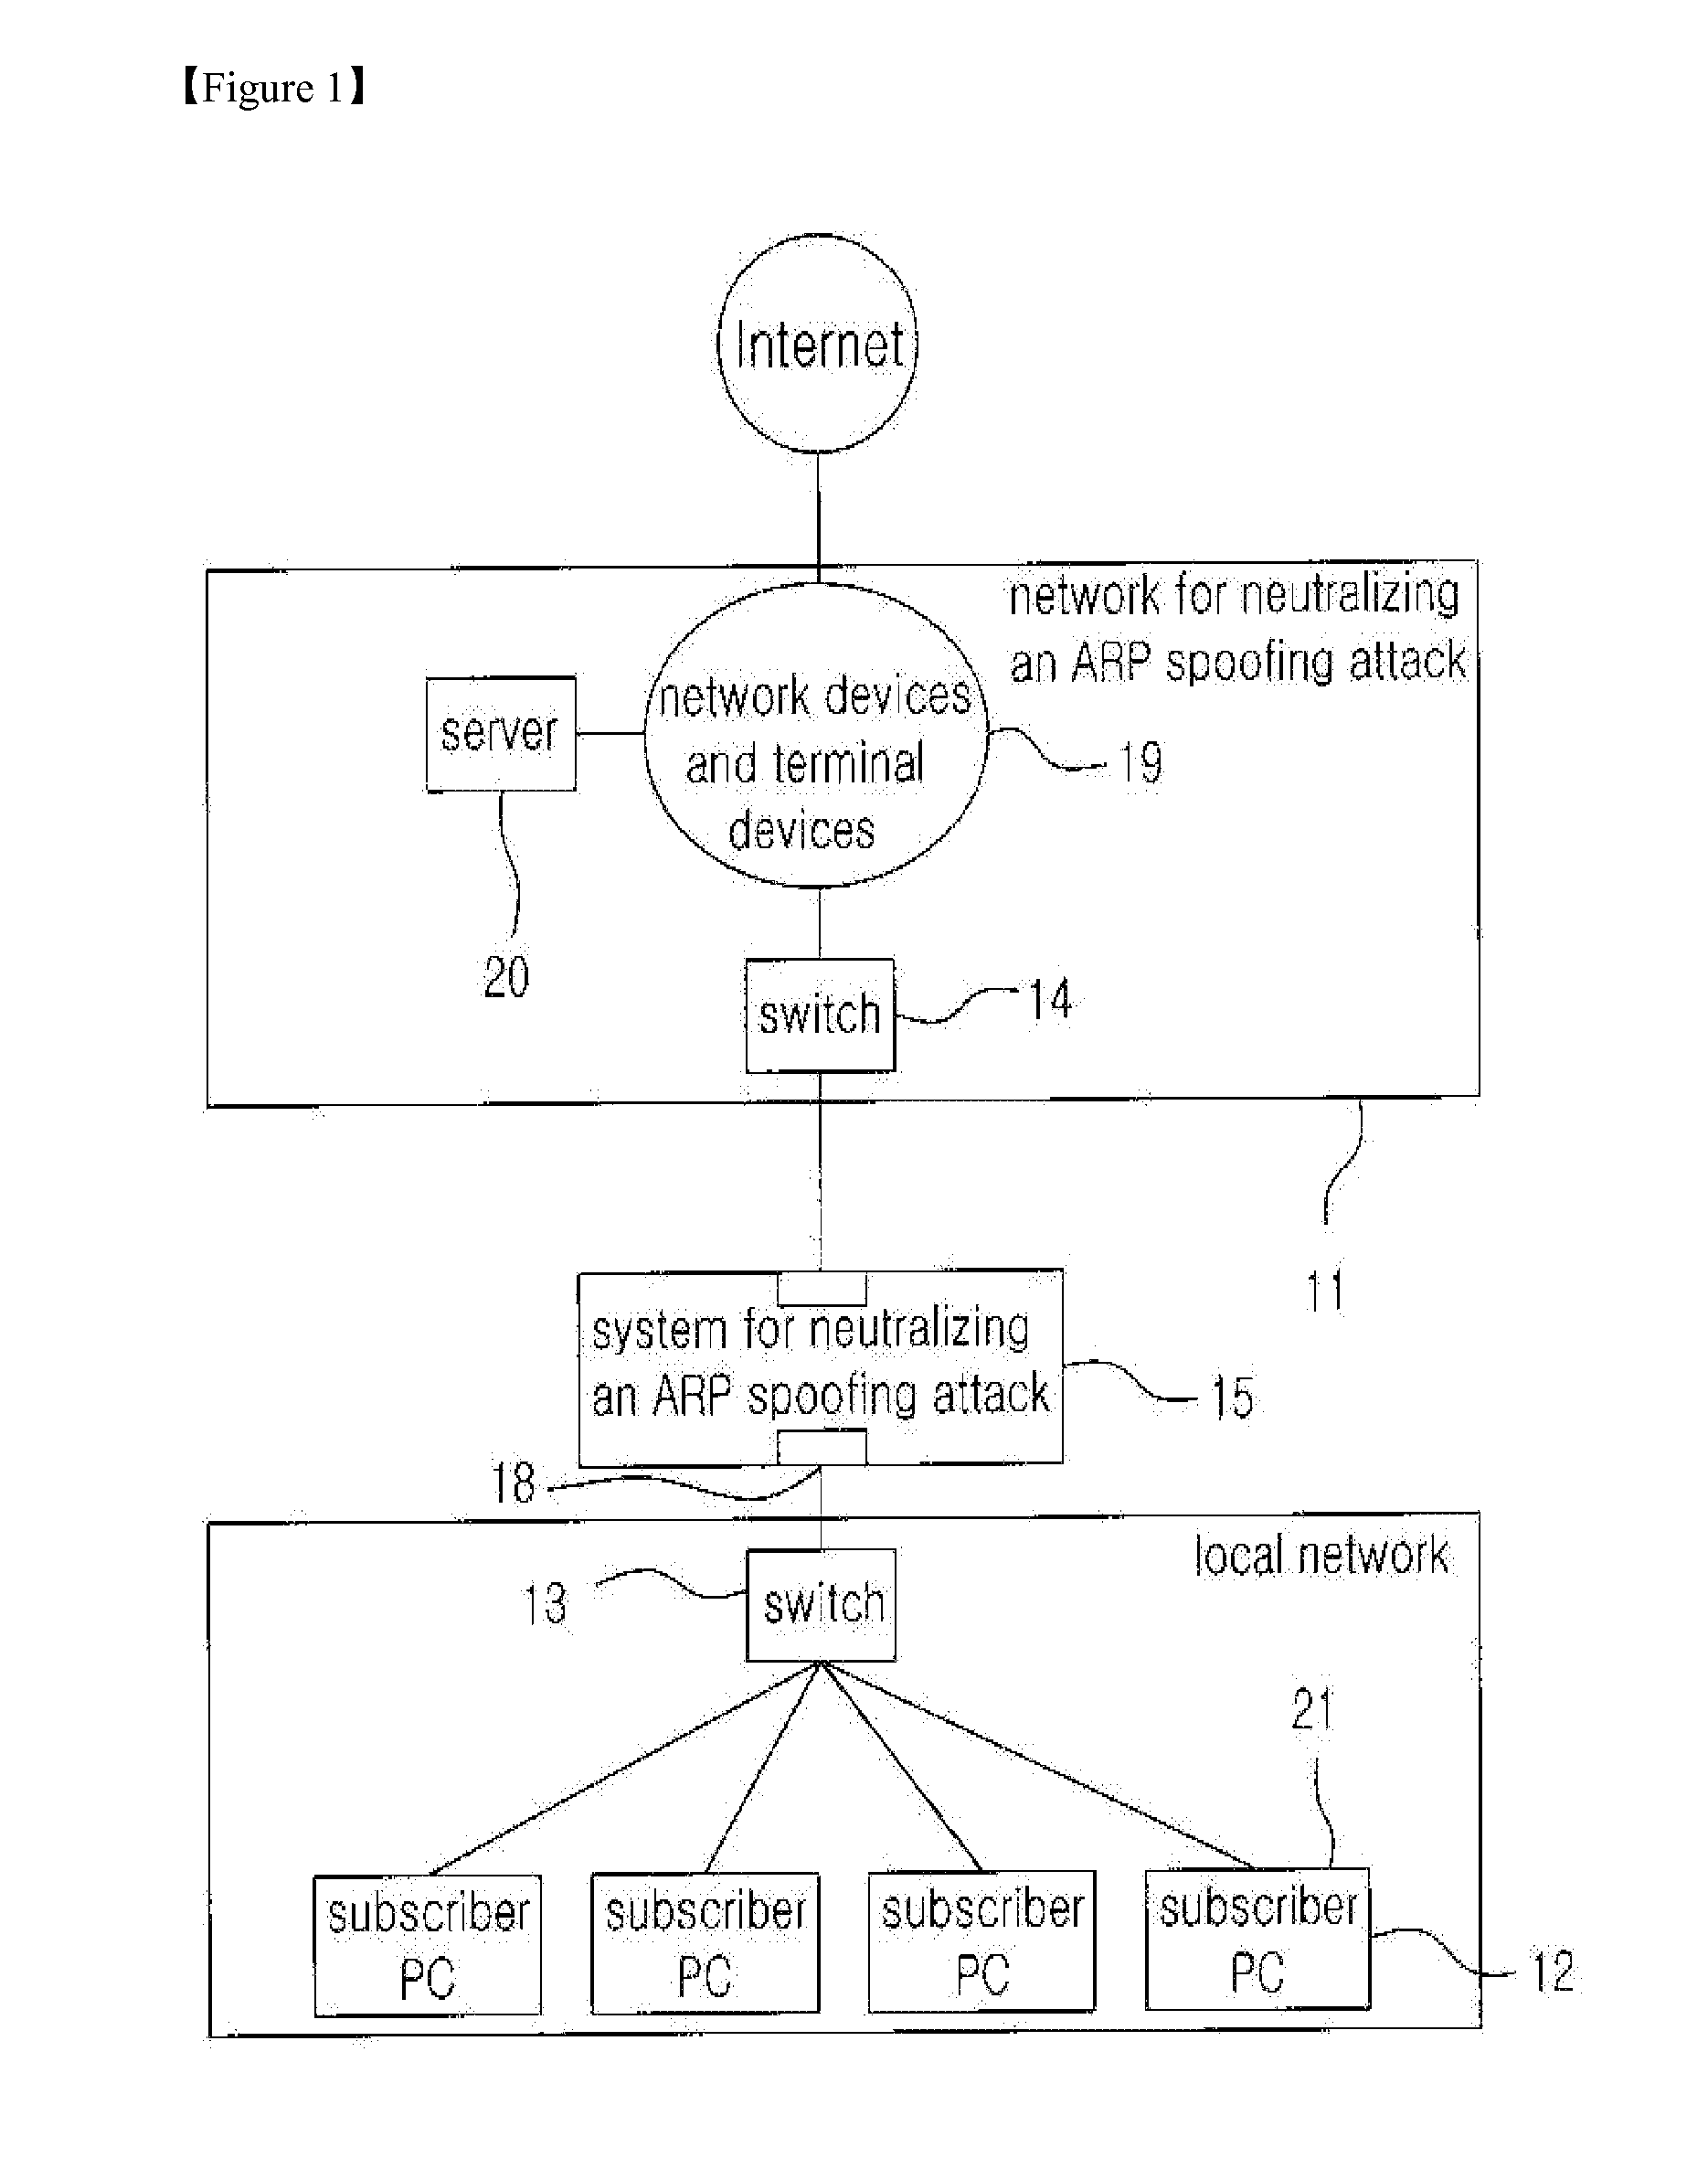 Method for neutralizing the arp spoofing attack by using counterfeit mac addresses